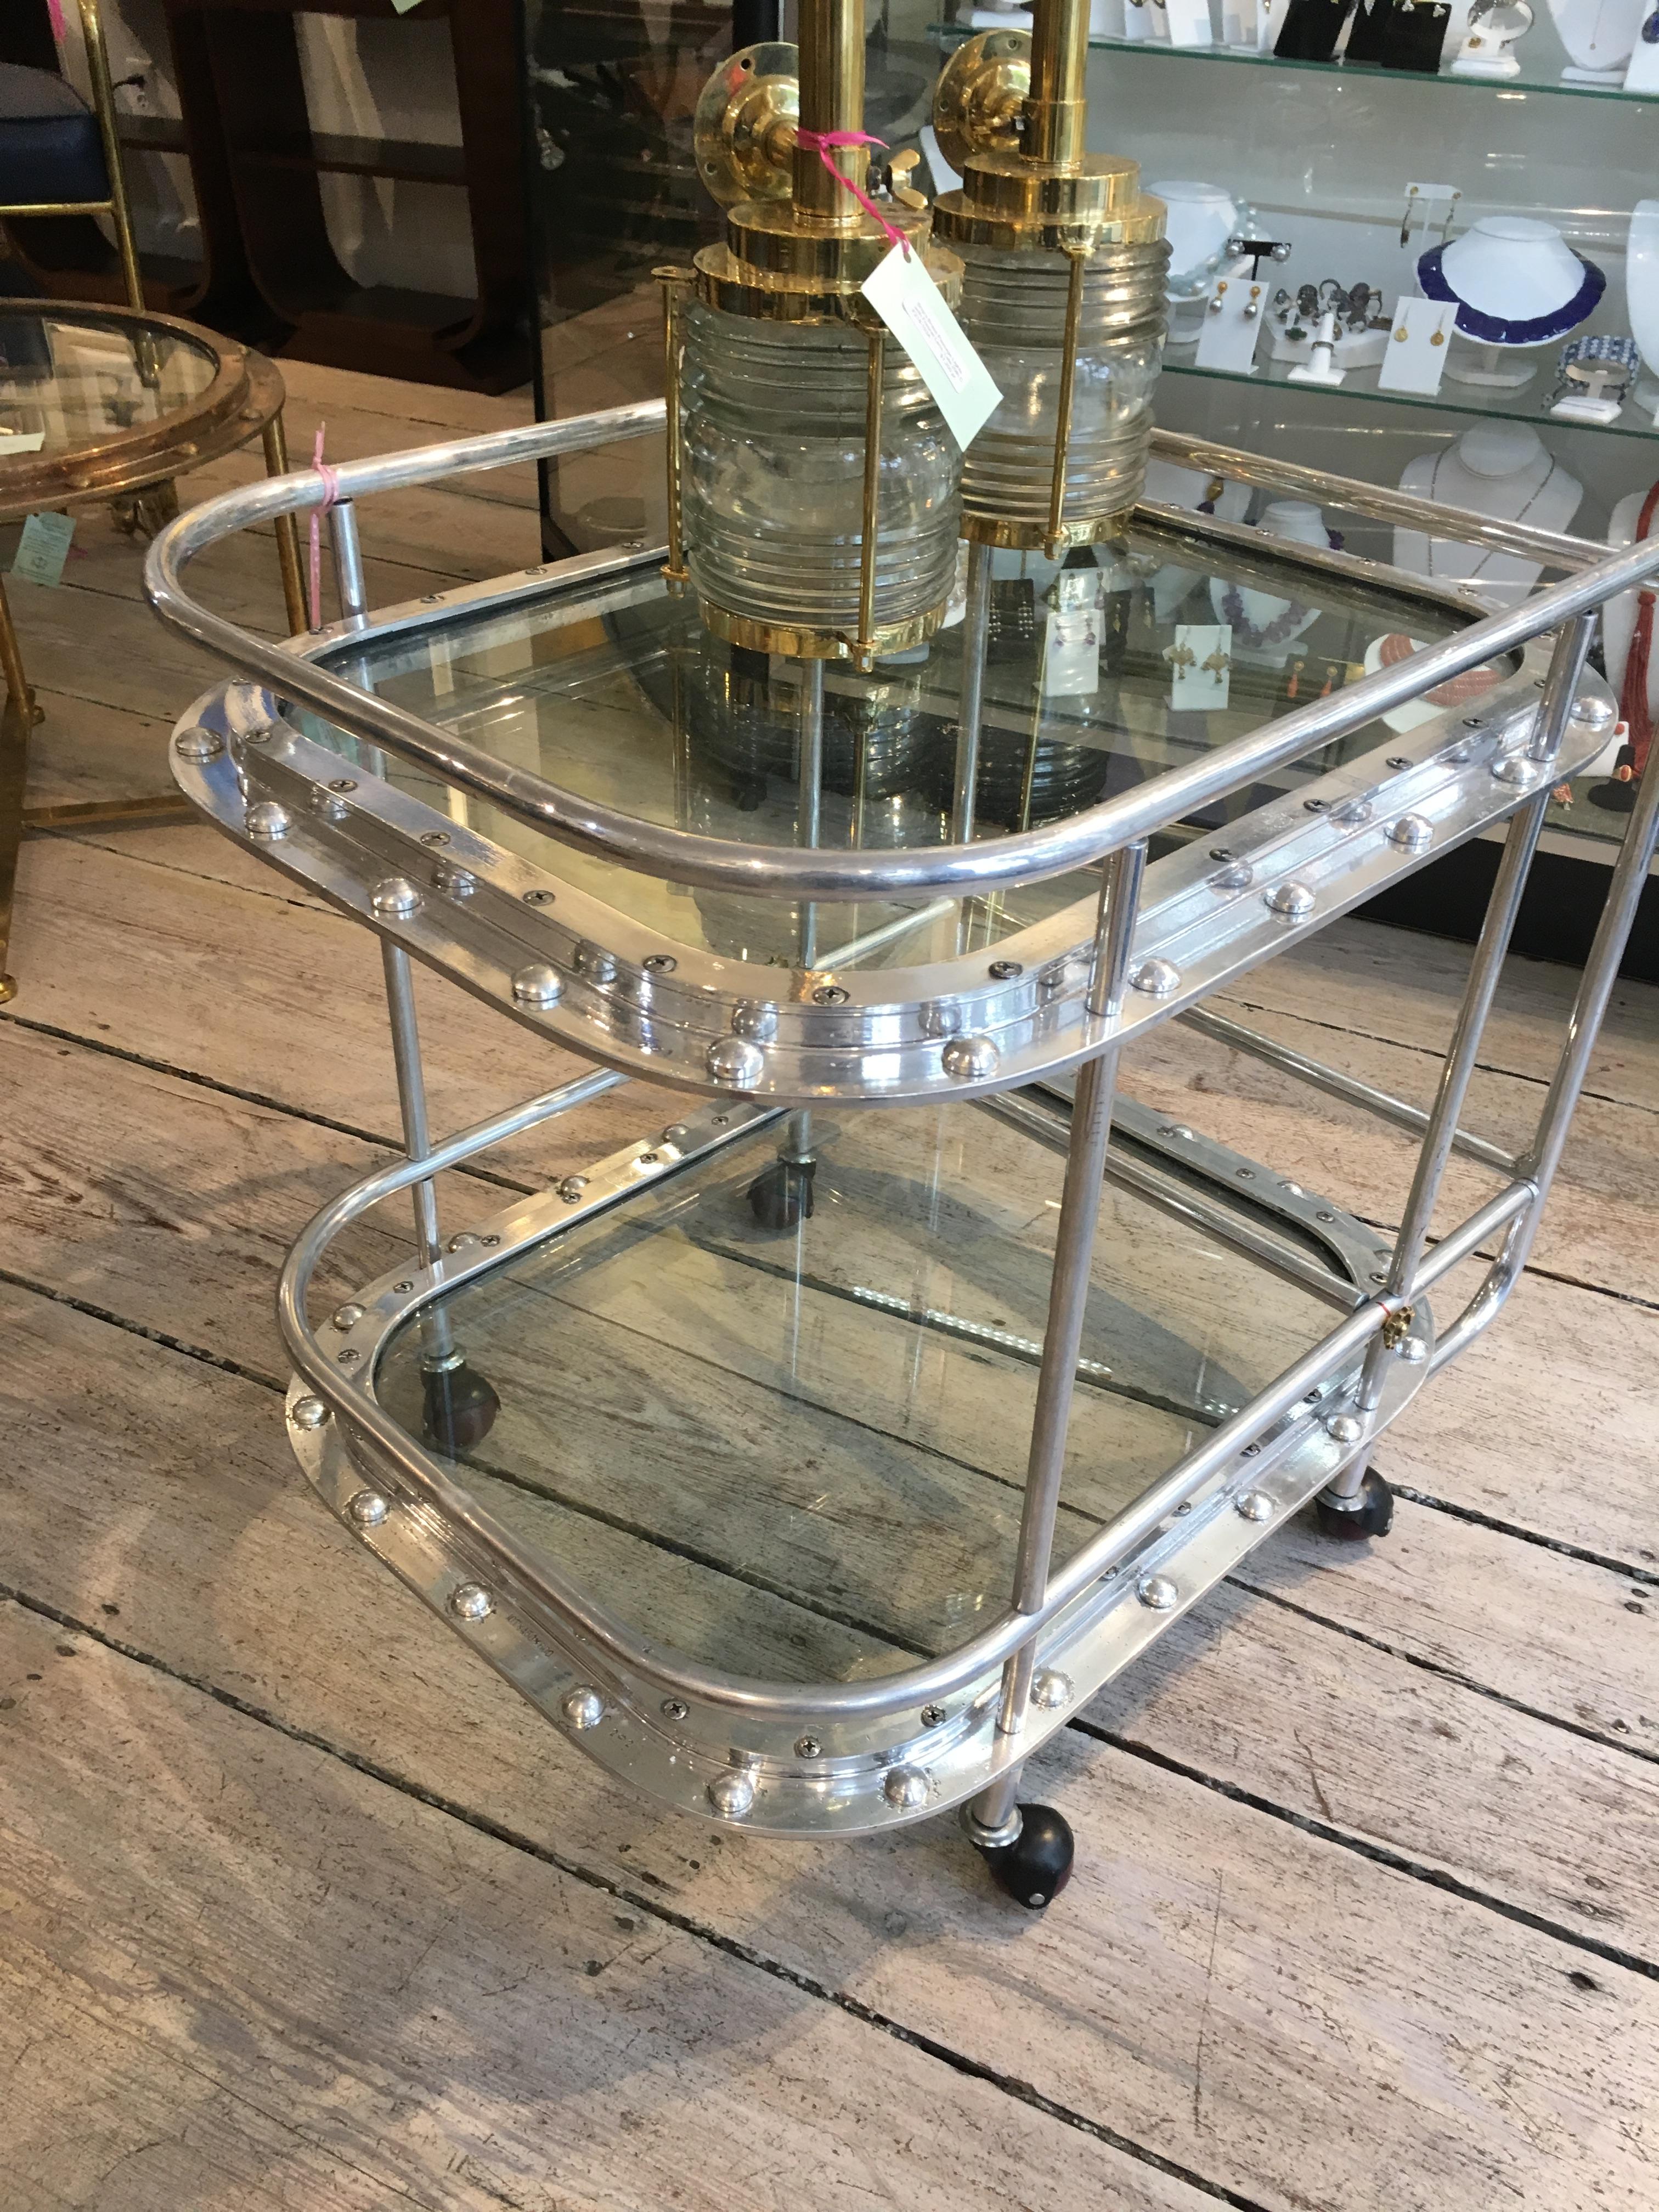 A bespoke piece, using two original 1970s chrome porthole windows with new rivets put back in (the original rivets pop out when ship's are dismantled), and then fashioned into a bar cart. Full round wheels make for easy manoeuvrability. 16 inches